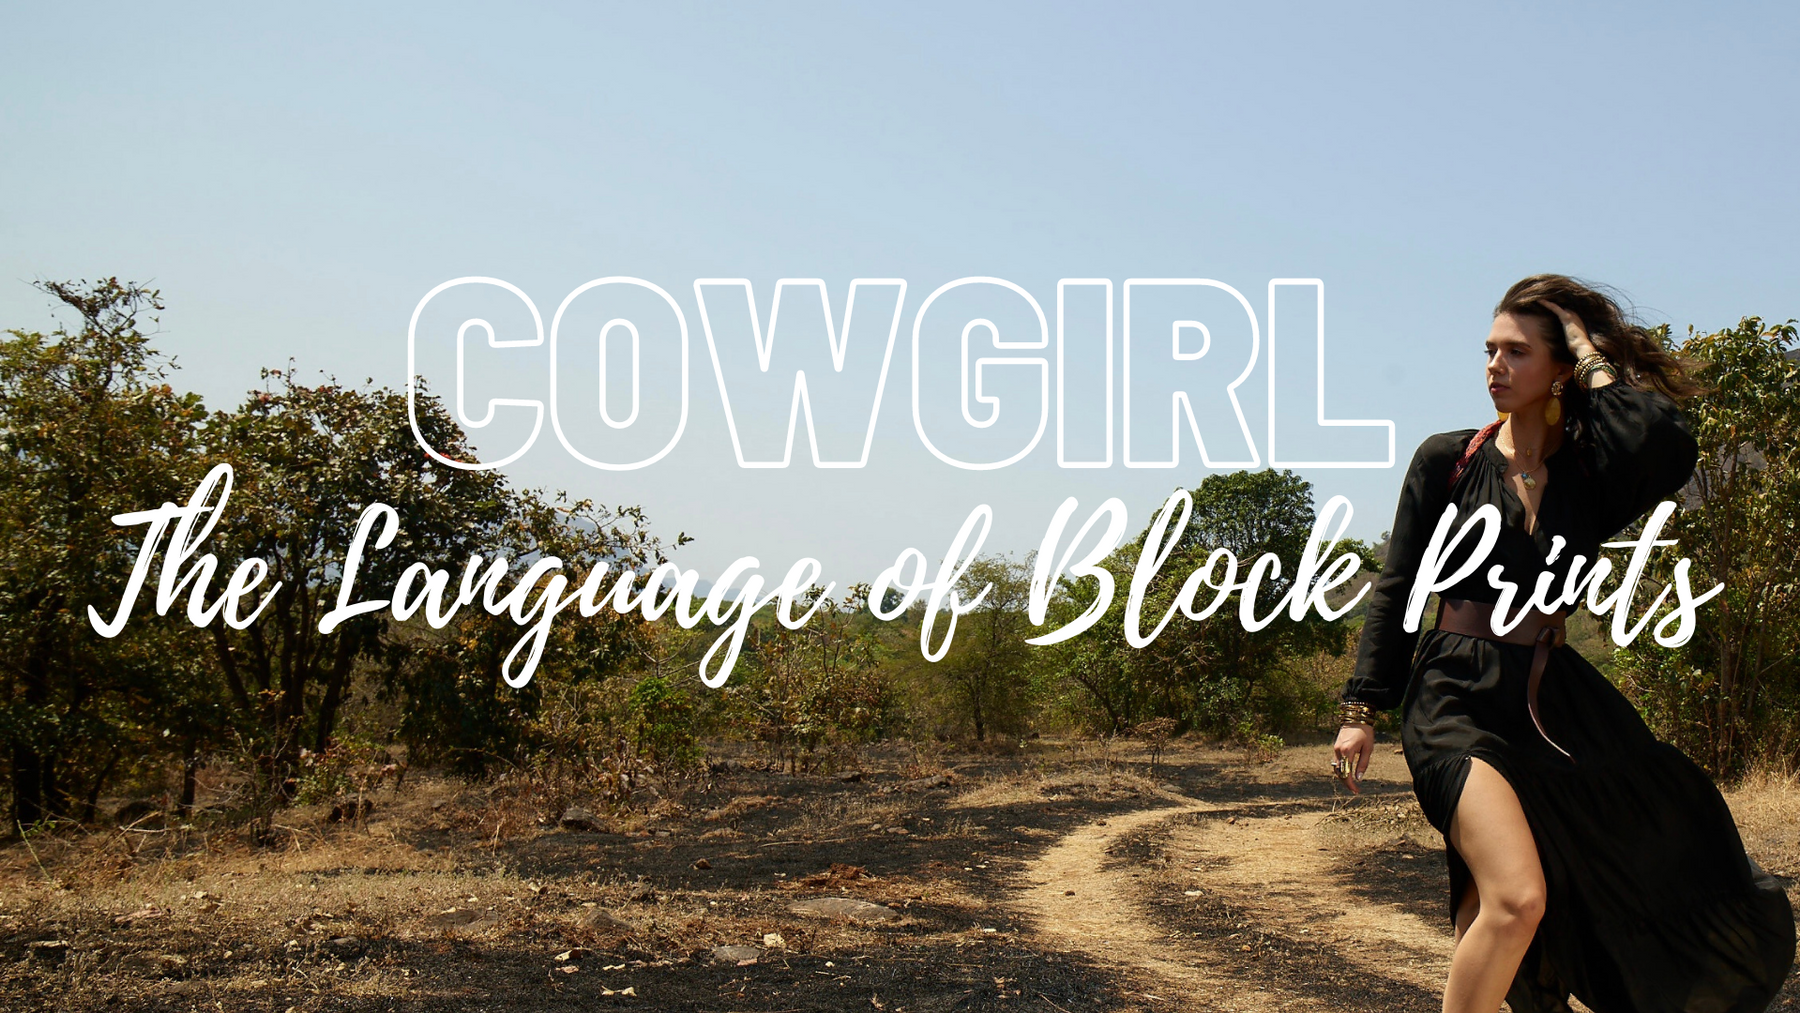 Cowgirl - The Language of Block Prints